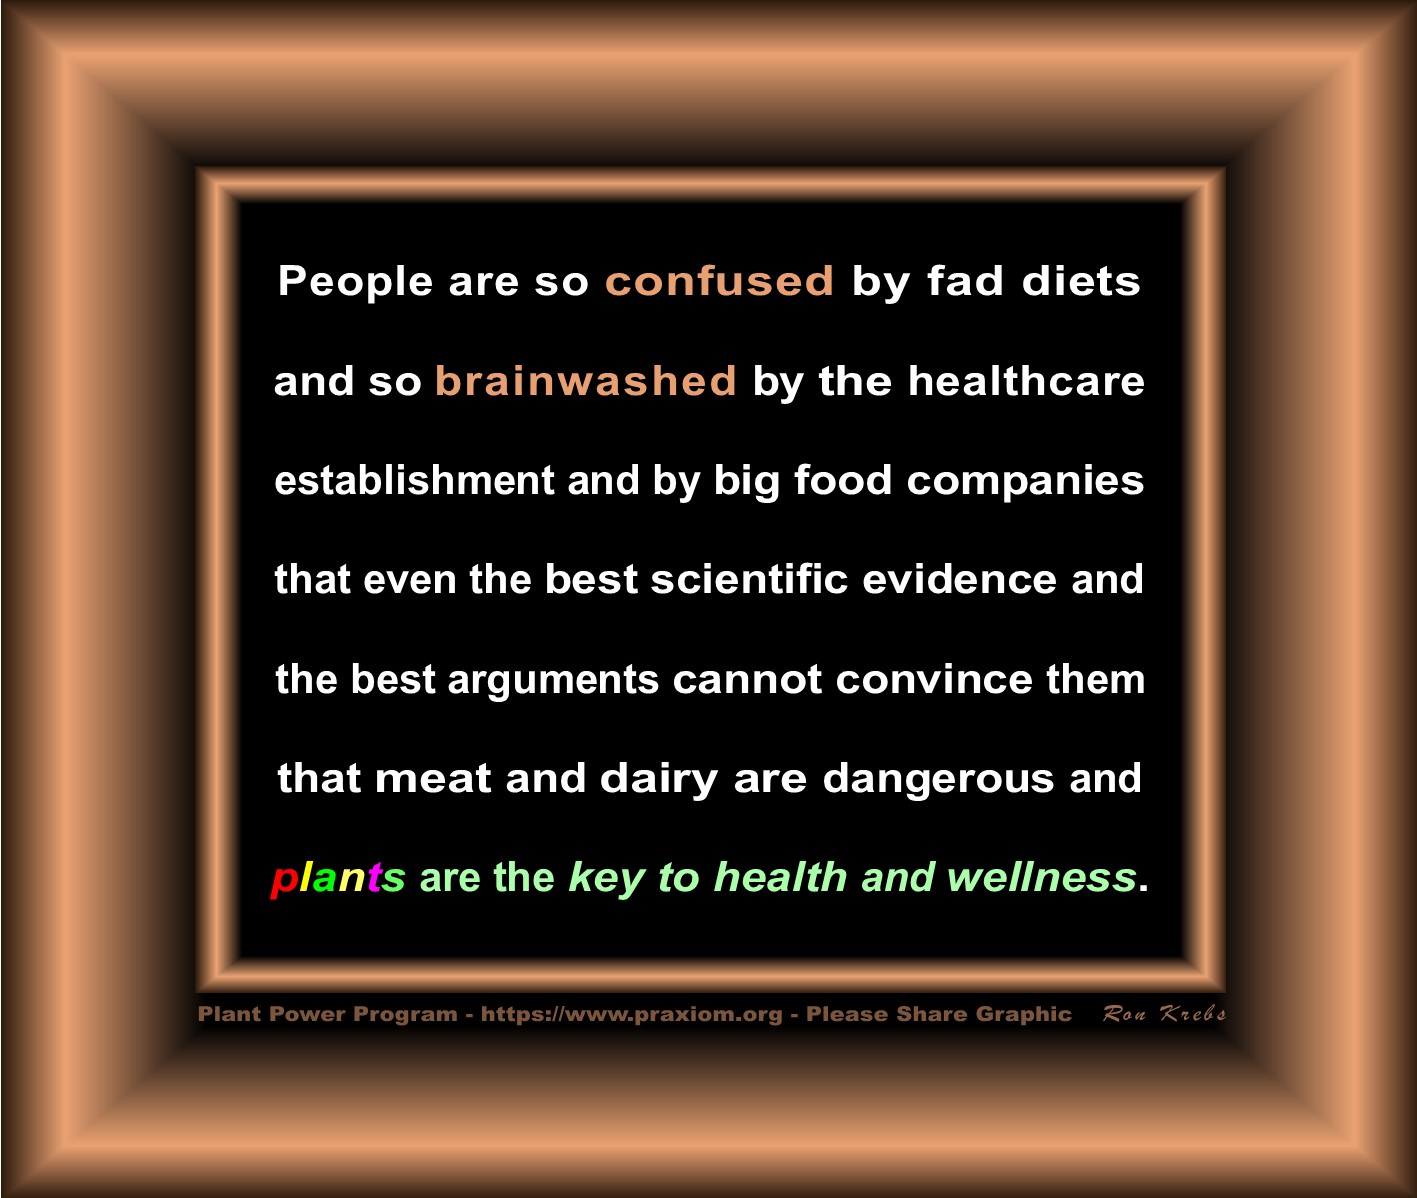 People are Confused by Fad Diets - Ron Krebs